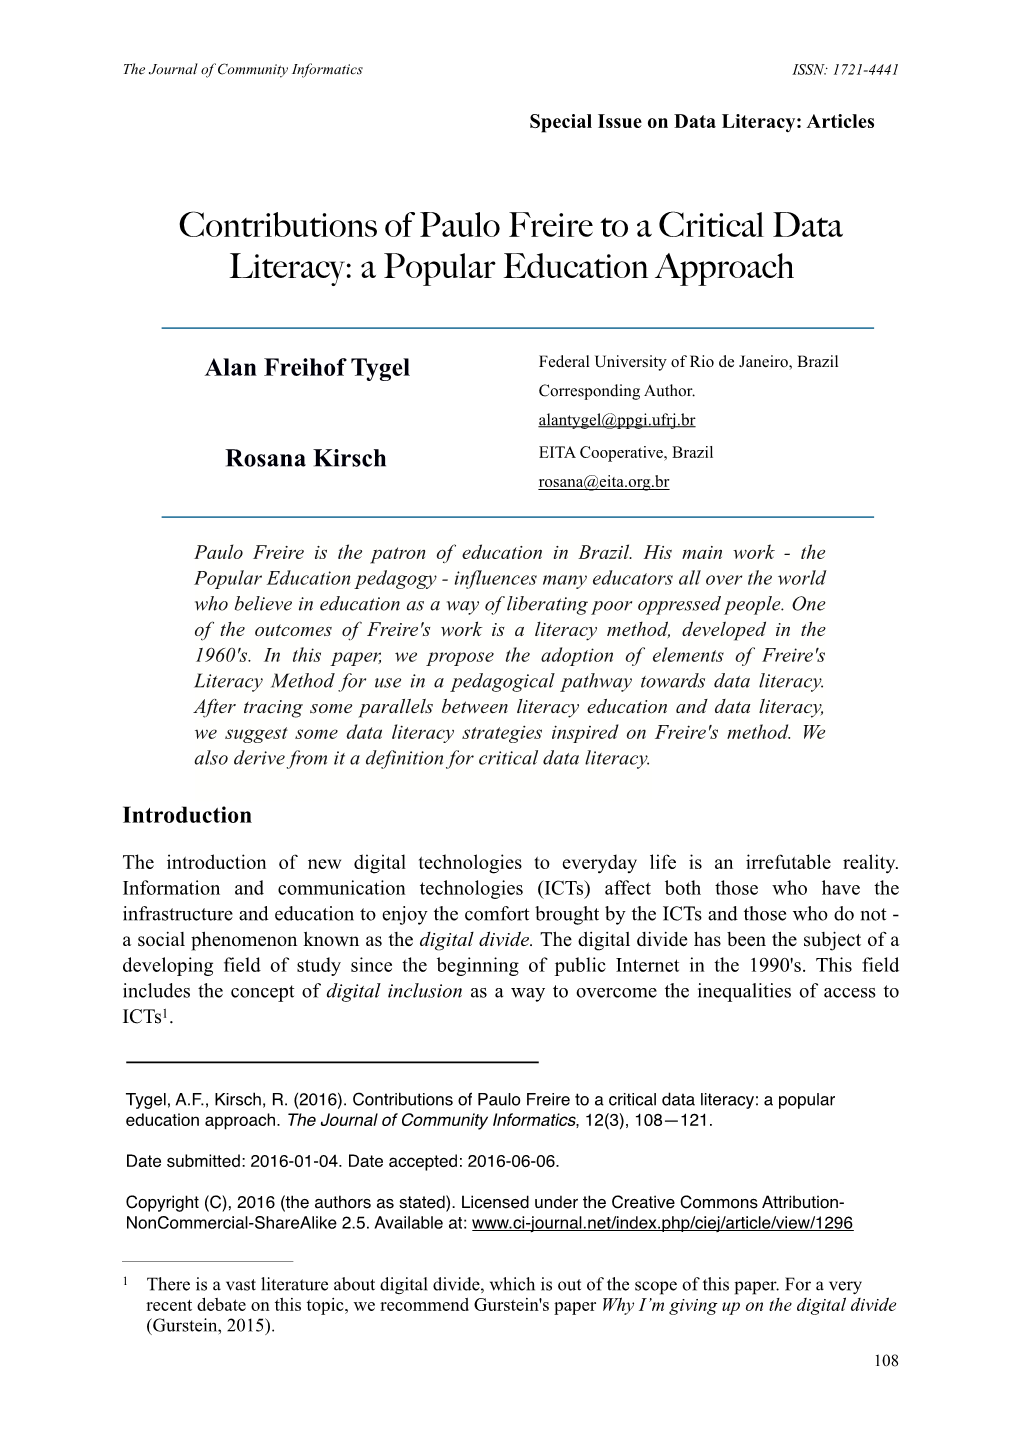 Contributions of Paulo Freire to a Critical Data Literacy: a Popular Education Approach